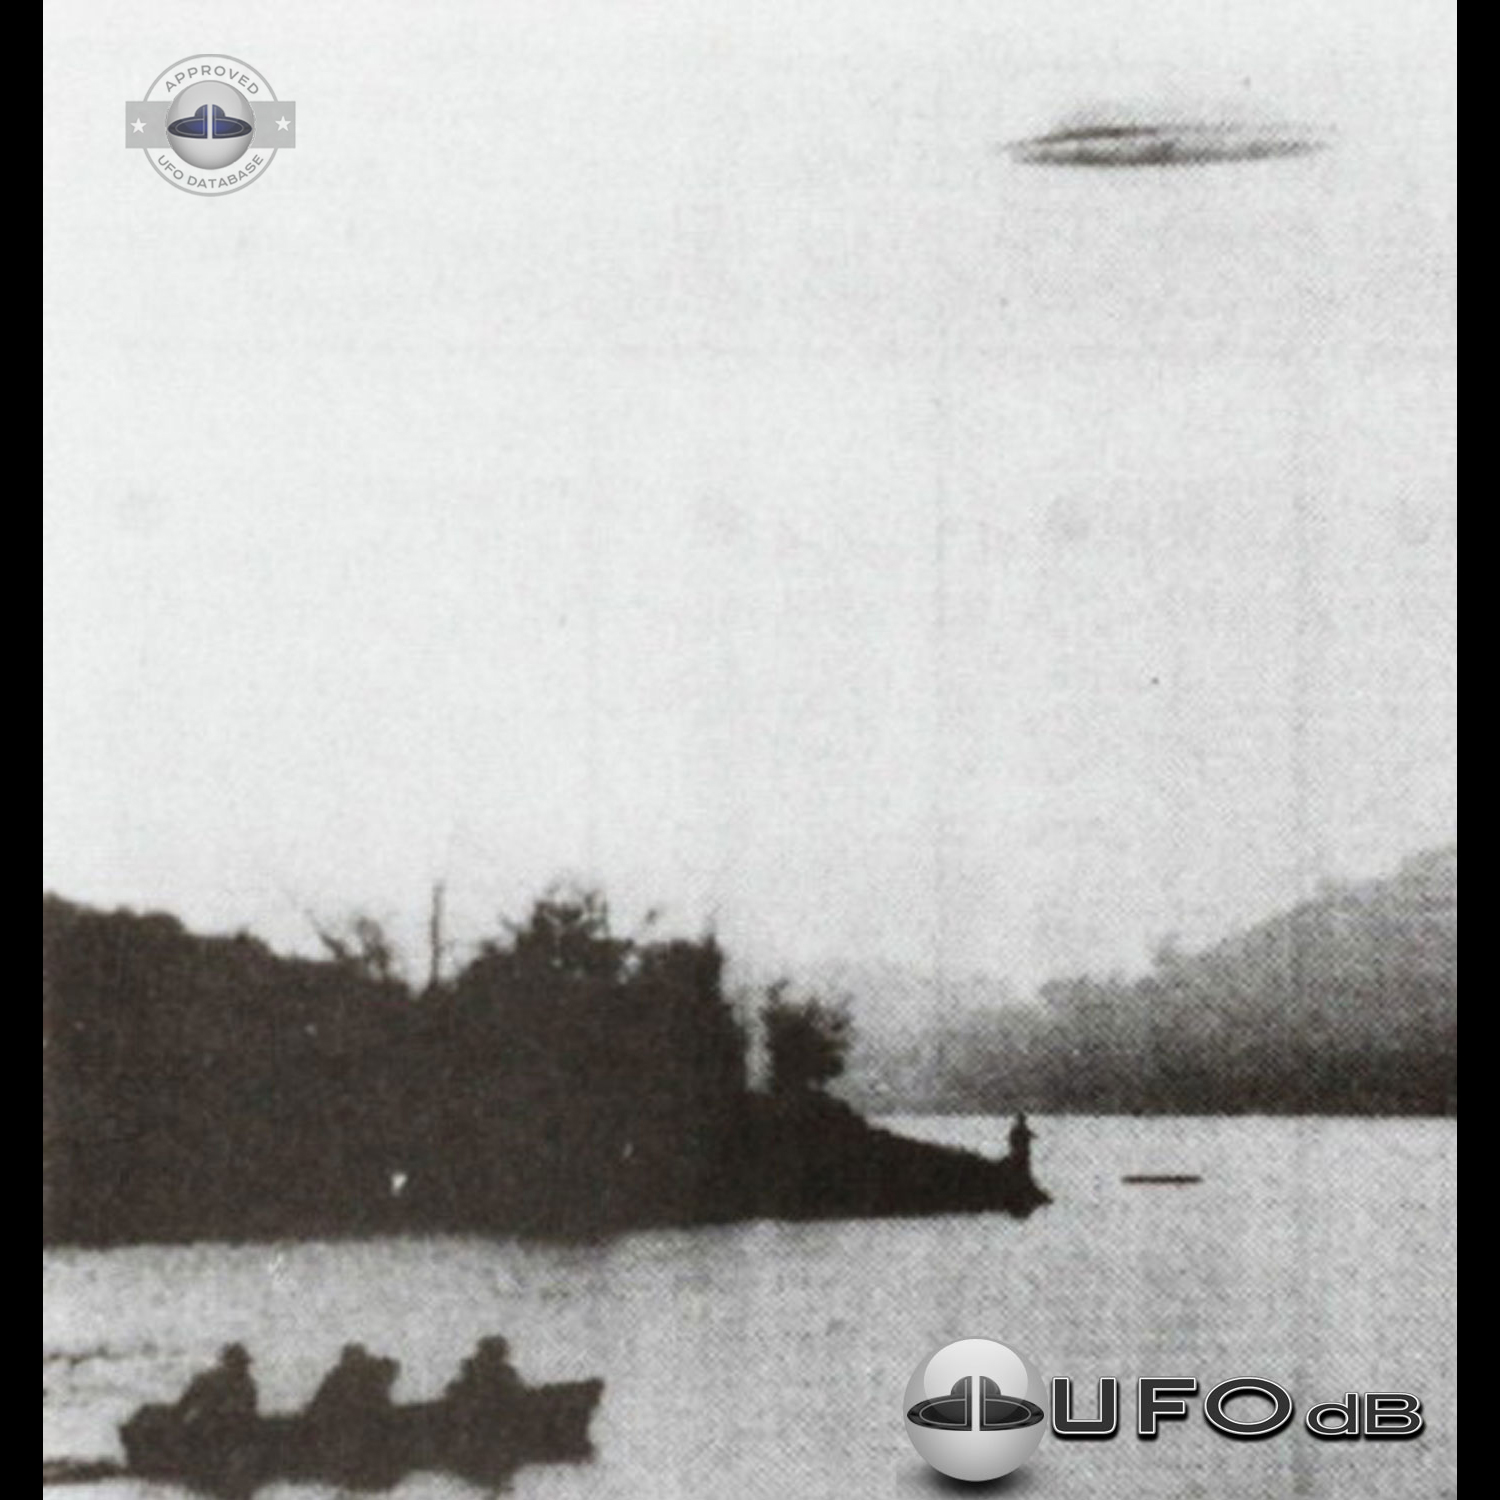 UFO over a fisherman and people in a canoe on a lake UFO Picture #45-1